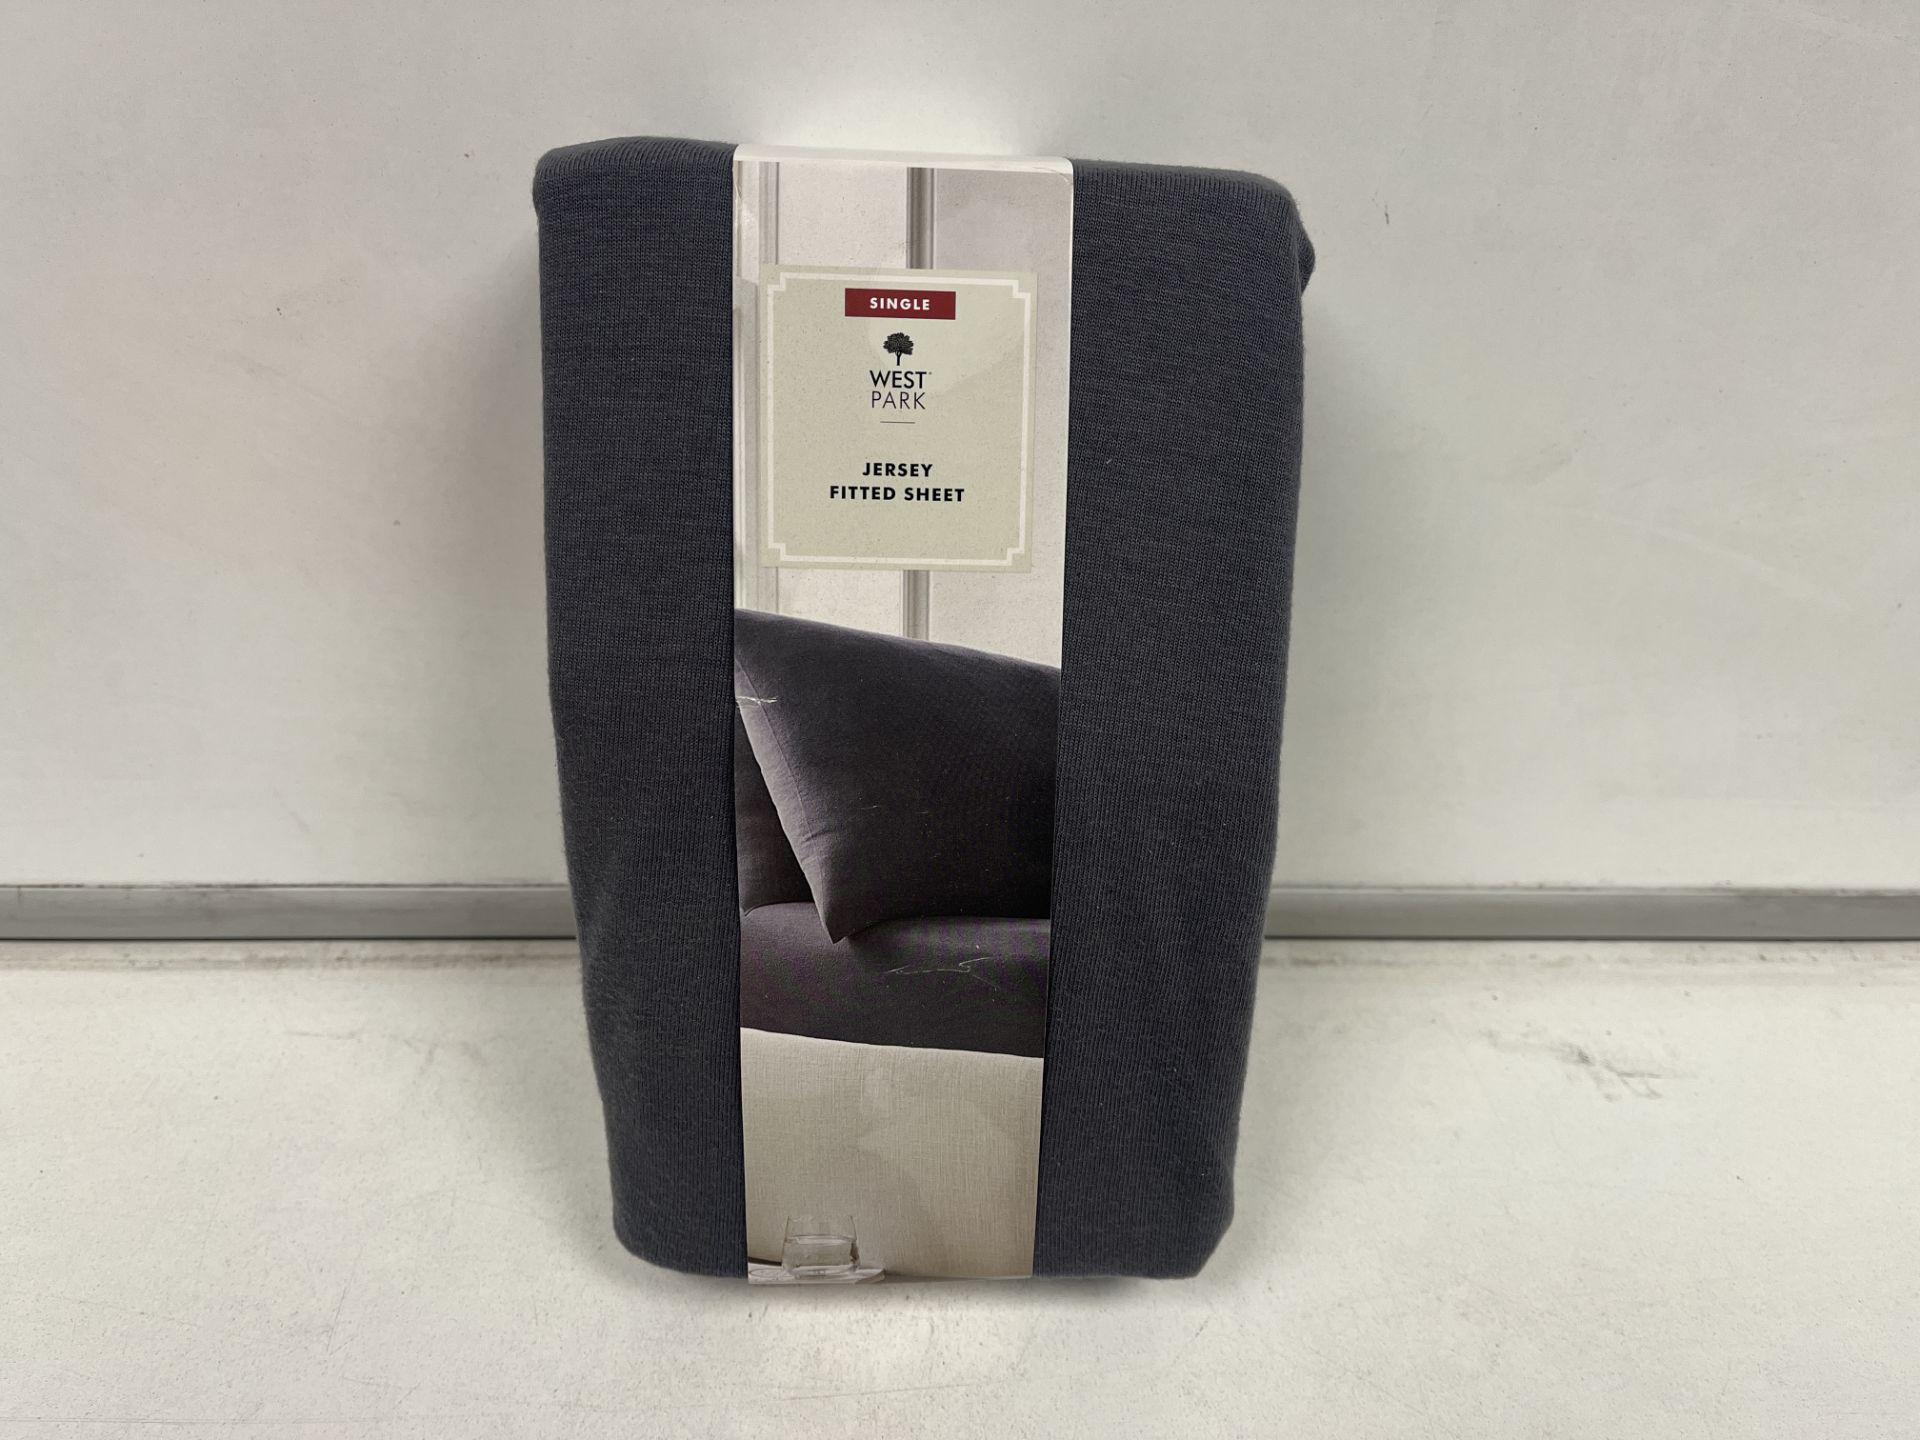 15 X BRAND NEW WEST PARK SINGLE JERSEY FITTED SHEETS R9B